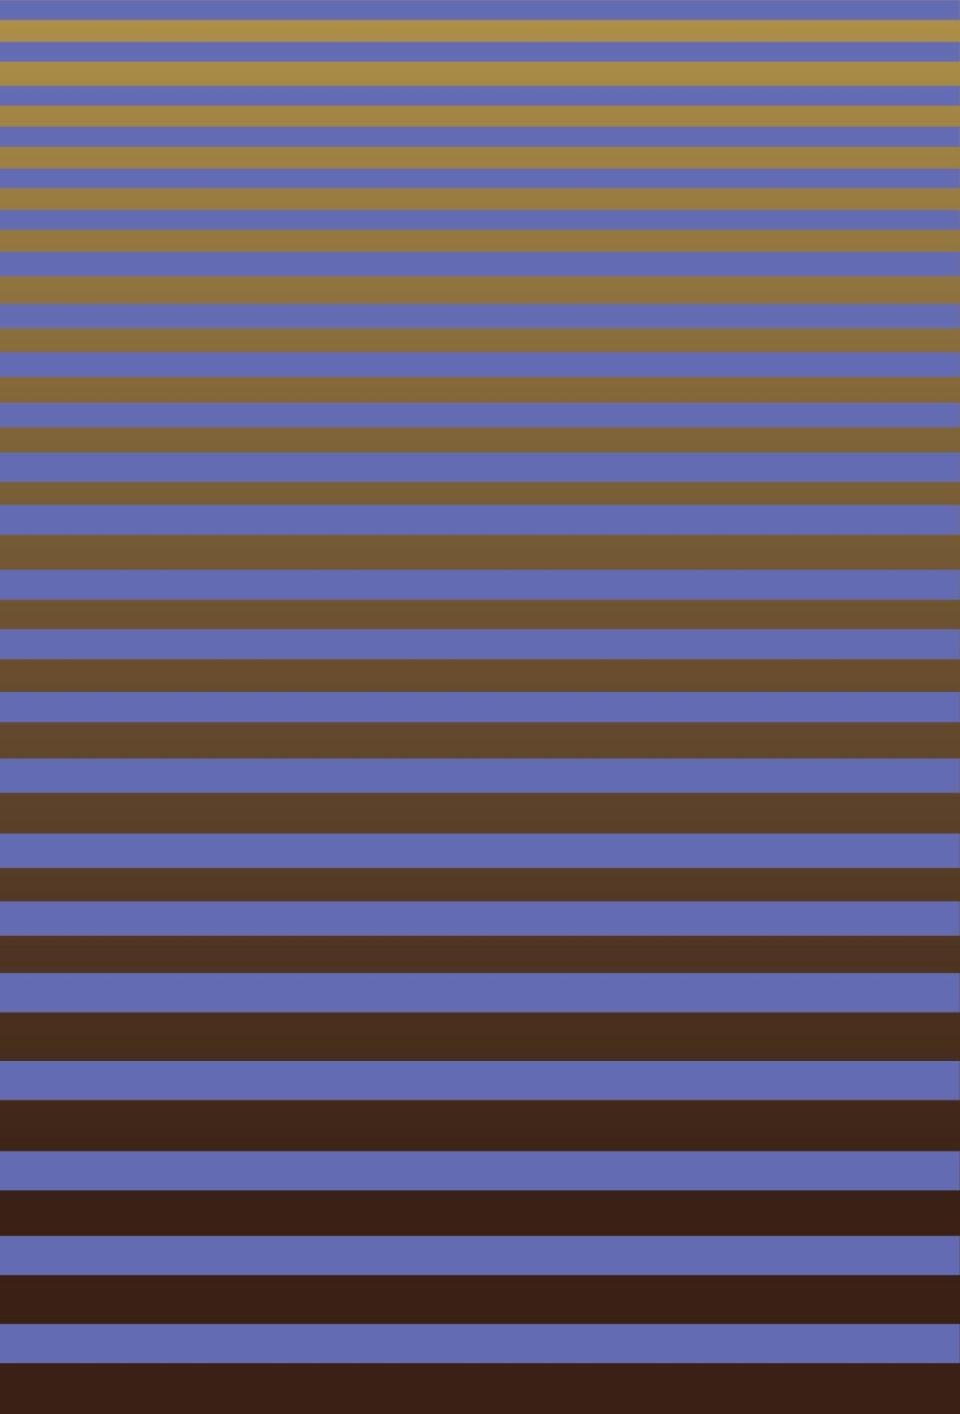 gradation of thin blue and yellow stripes into thick black and blue stripes